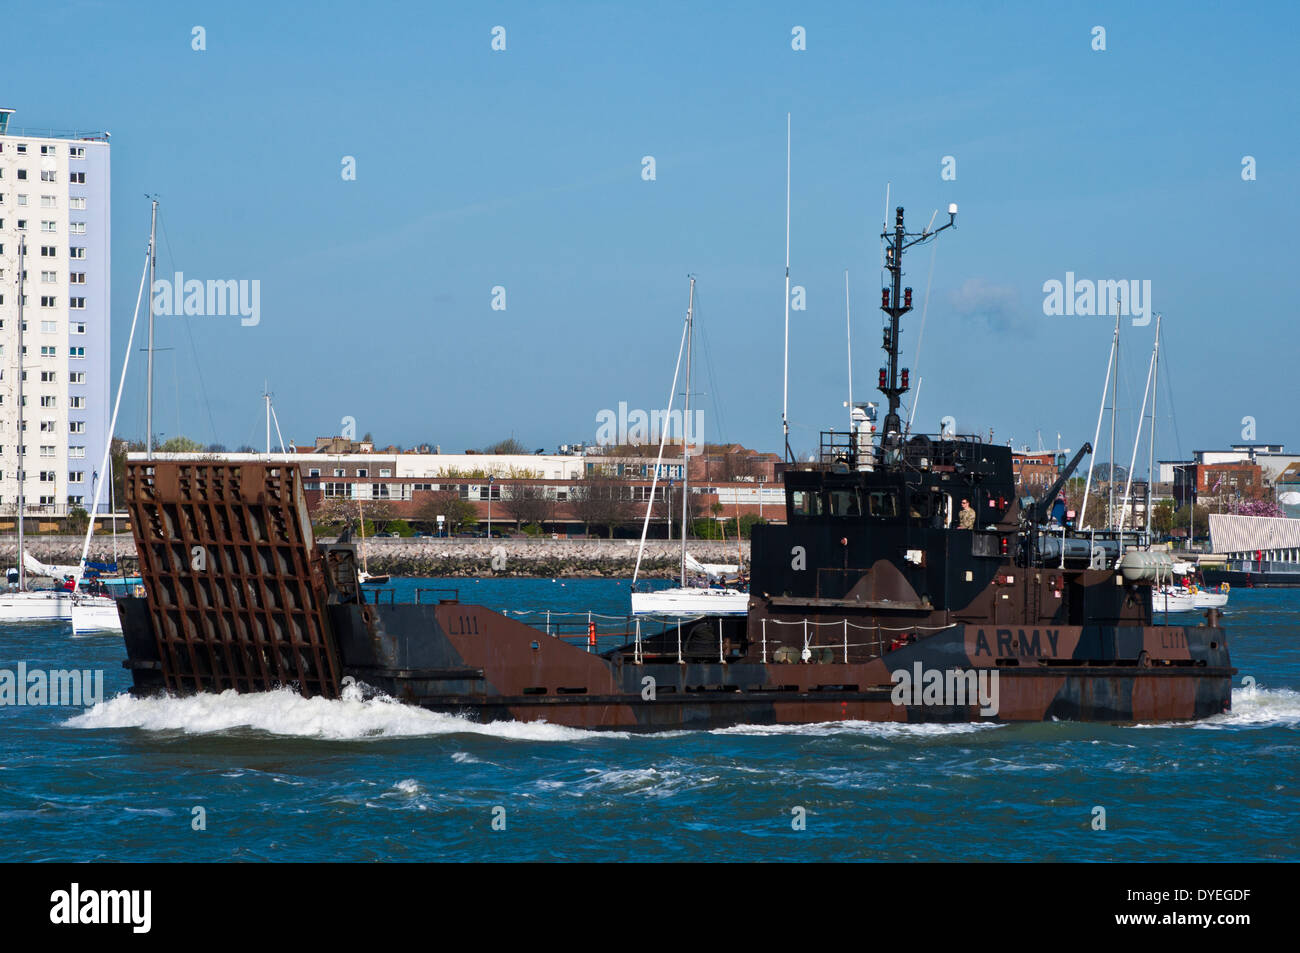 Army landing craft leaving Portsmouth harbour Stock Photo